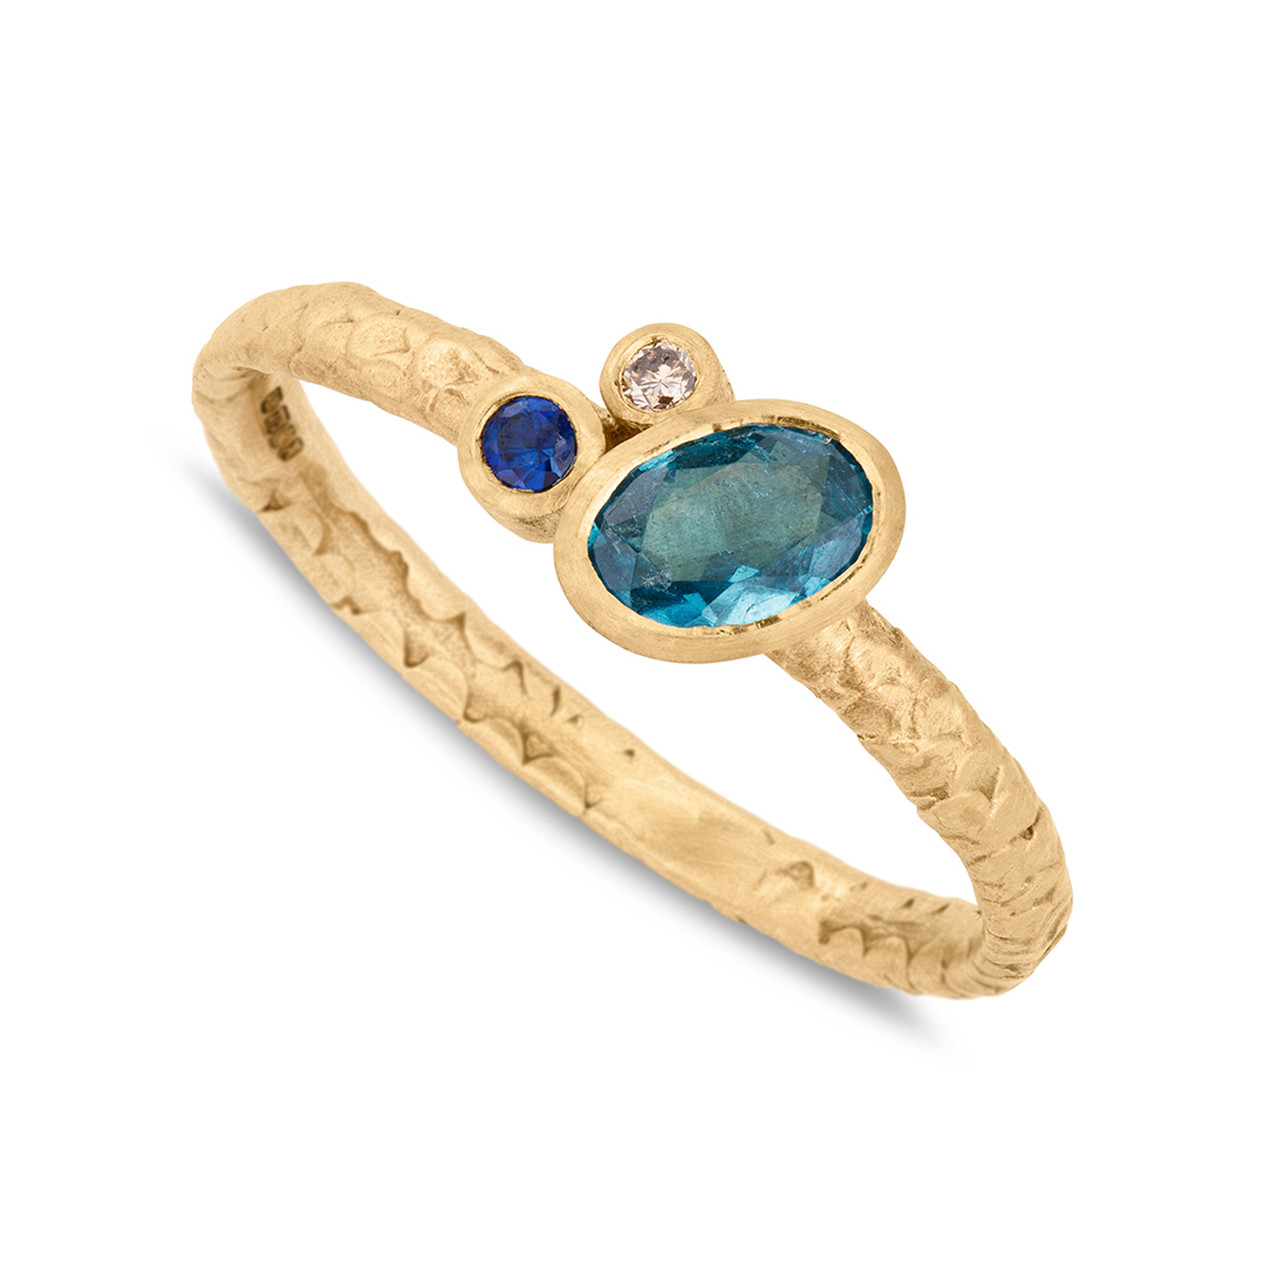 One-Of-A-Kind Ocean Blue Cluster Ring, Alison Macleod, tomfoolery